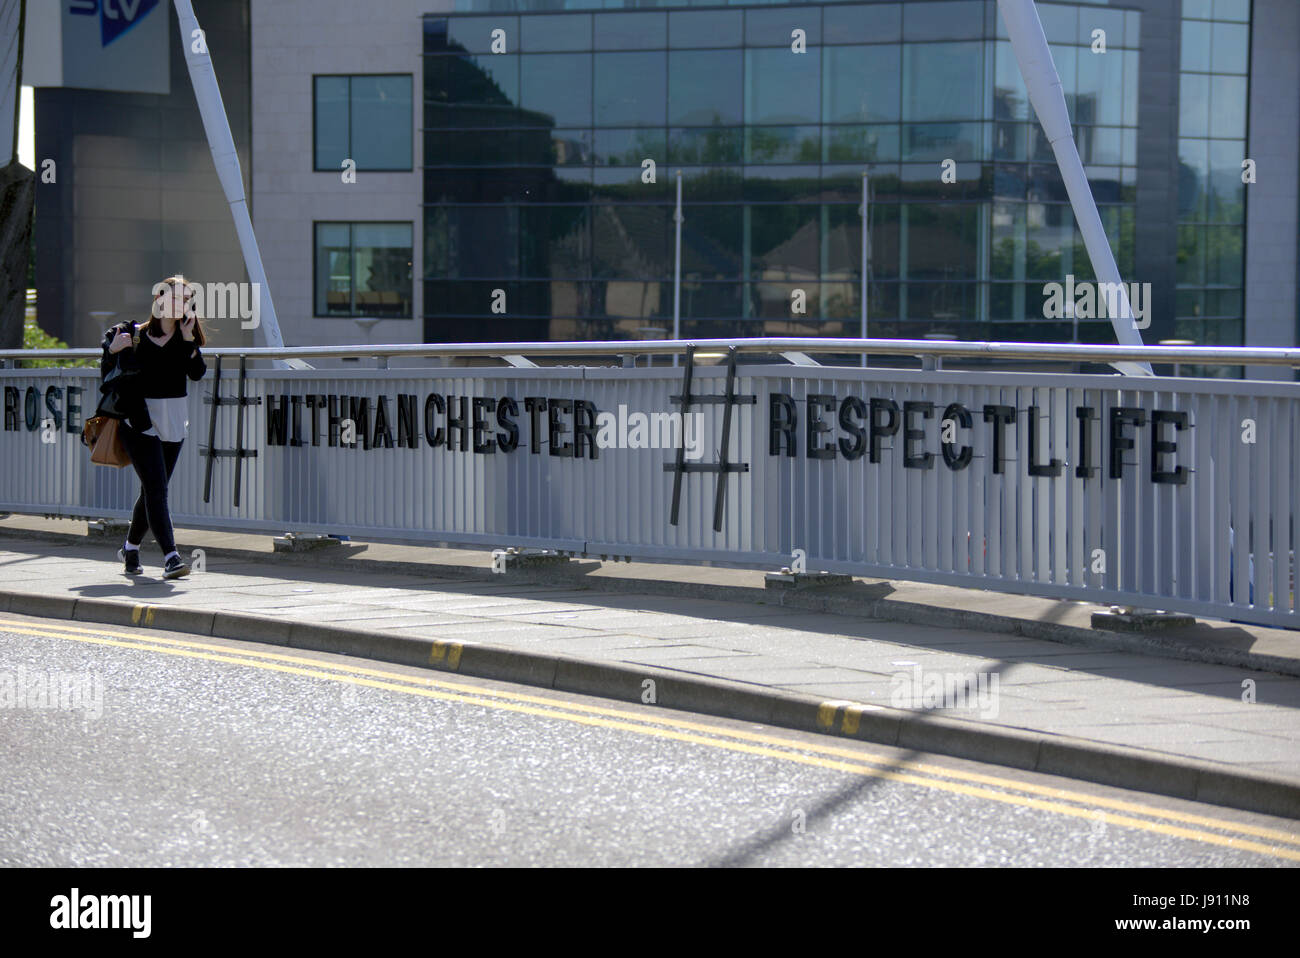 Glasgow, Scotland, UK 31st May,Tribute to Manchester bombing victims appears on Clyde Bridge. The Squinty  Bridge at the Pacific Quay home of the Scottish media community was covered in the names  of all of the Manchester bombing victims overnight by a mystery artist. Gerard Ferry/Alamy Live News Stock Photo